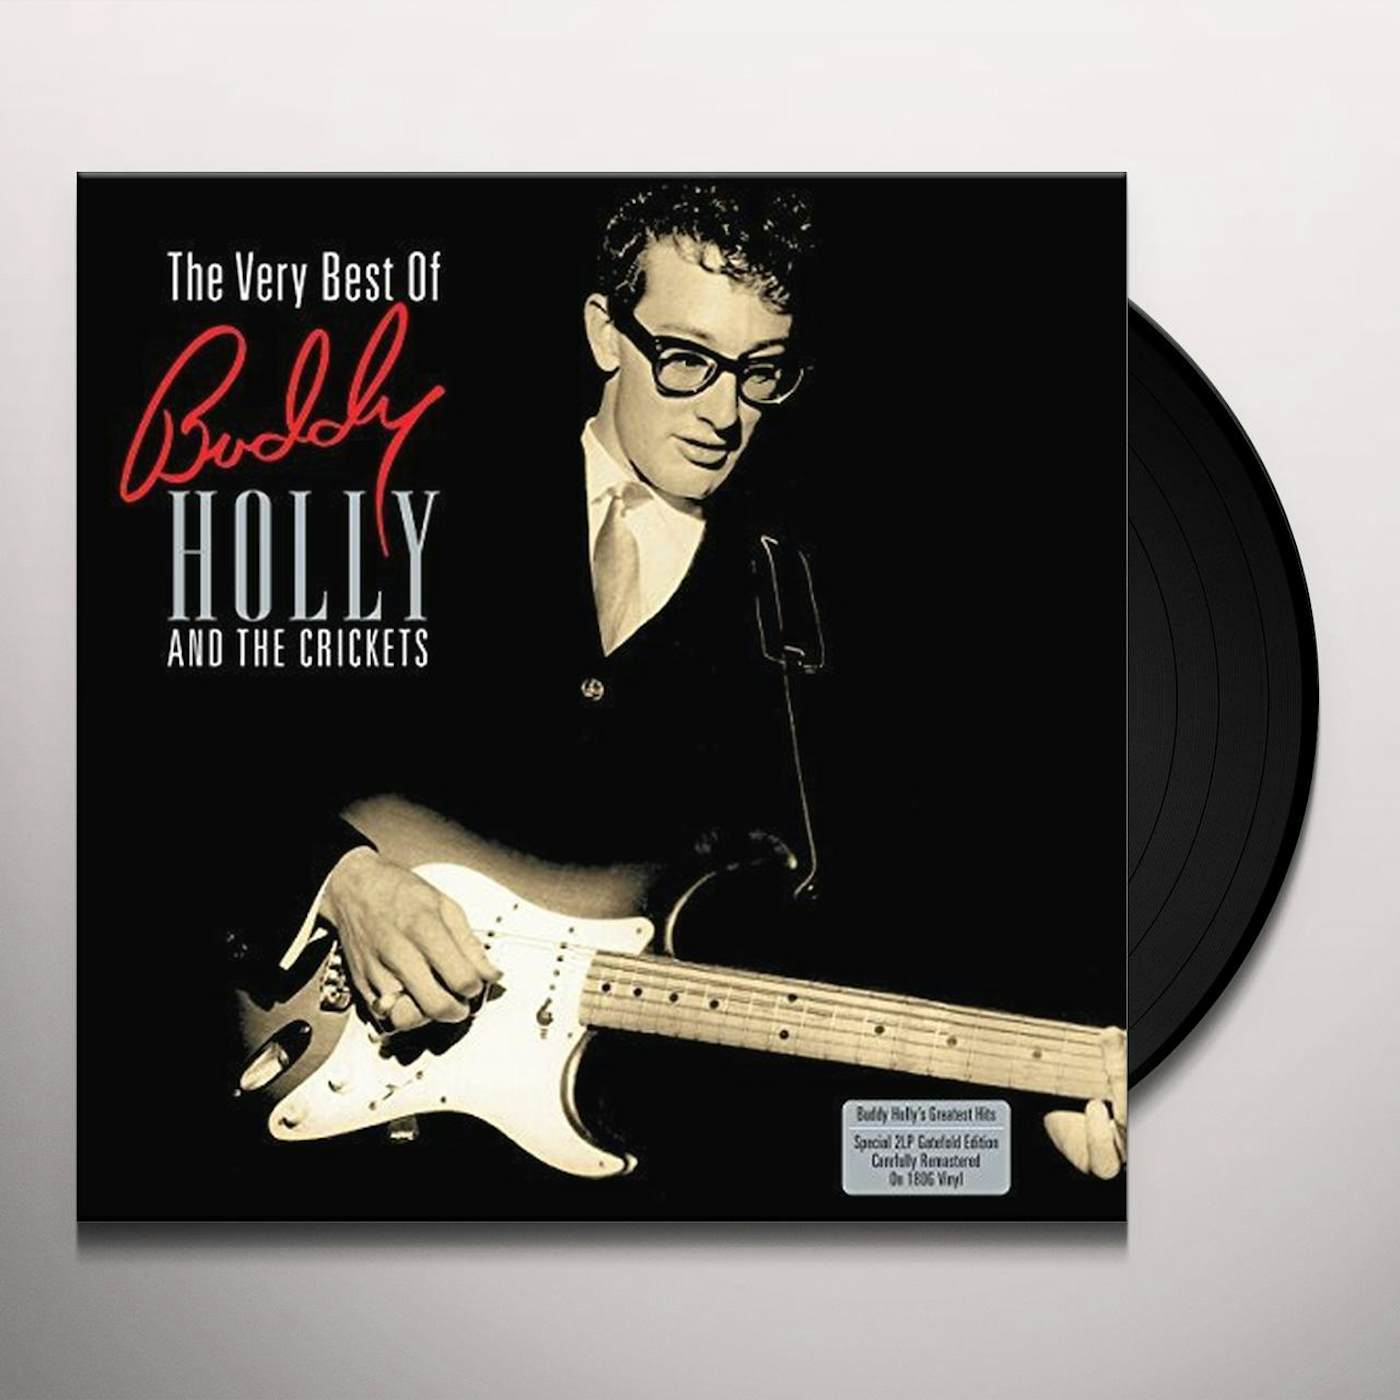 Buddy Holly & The Crickets VERY BEST OF Vinyl Record